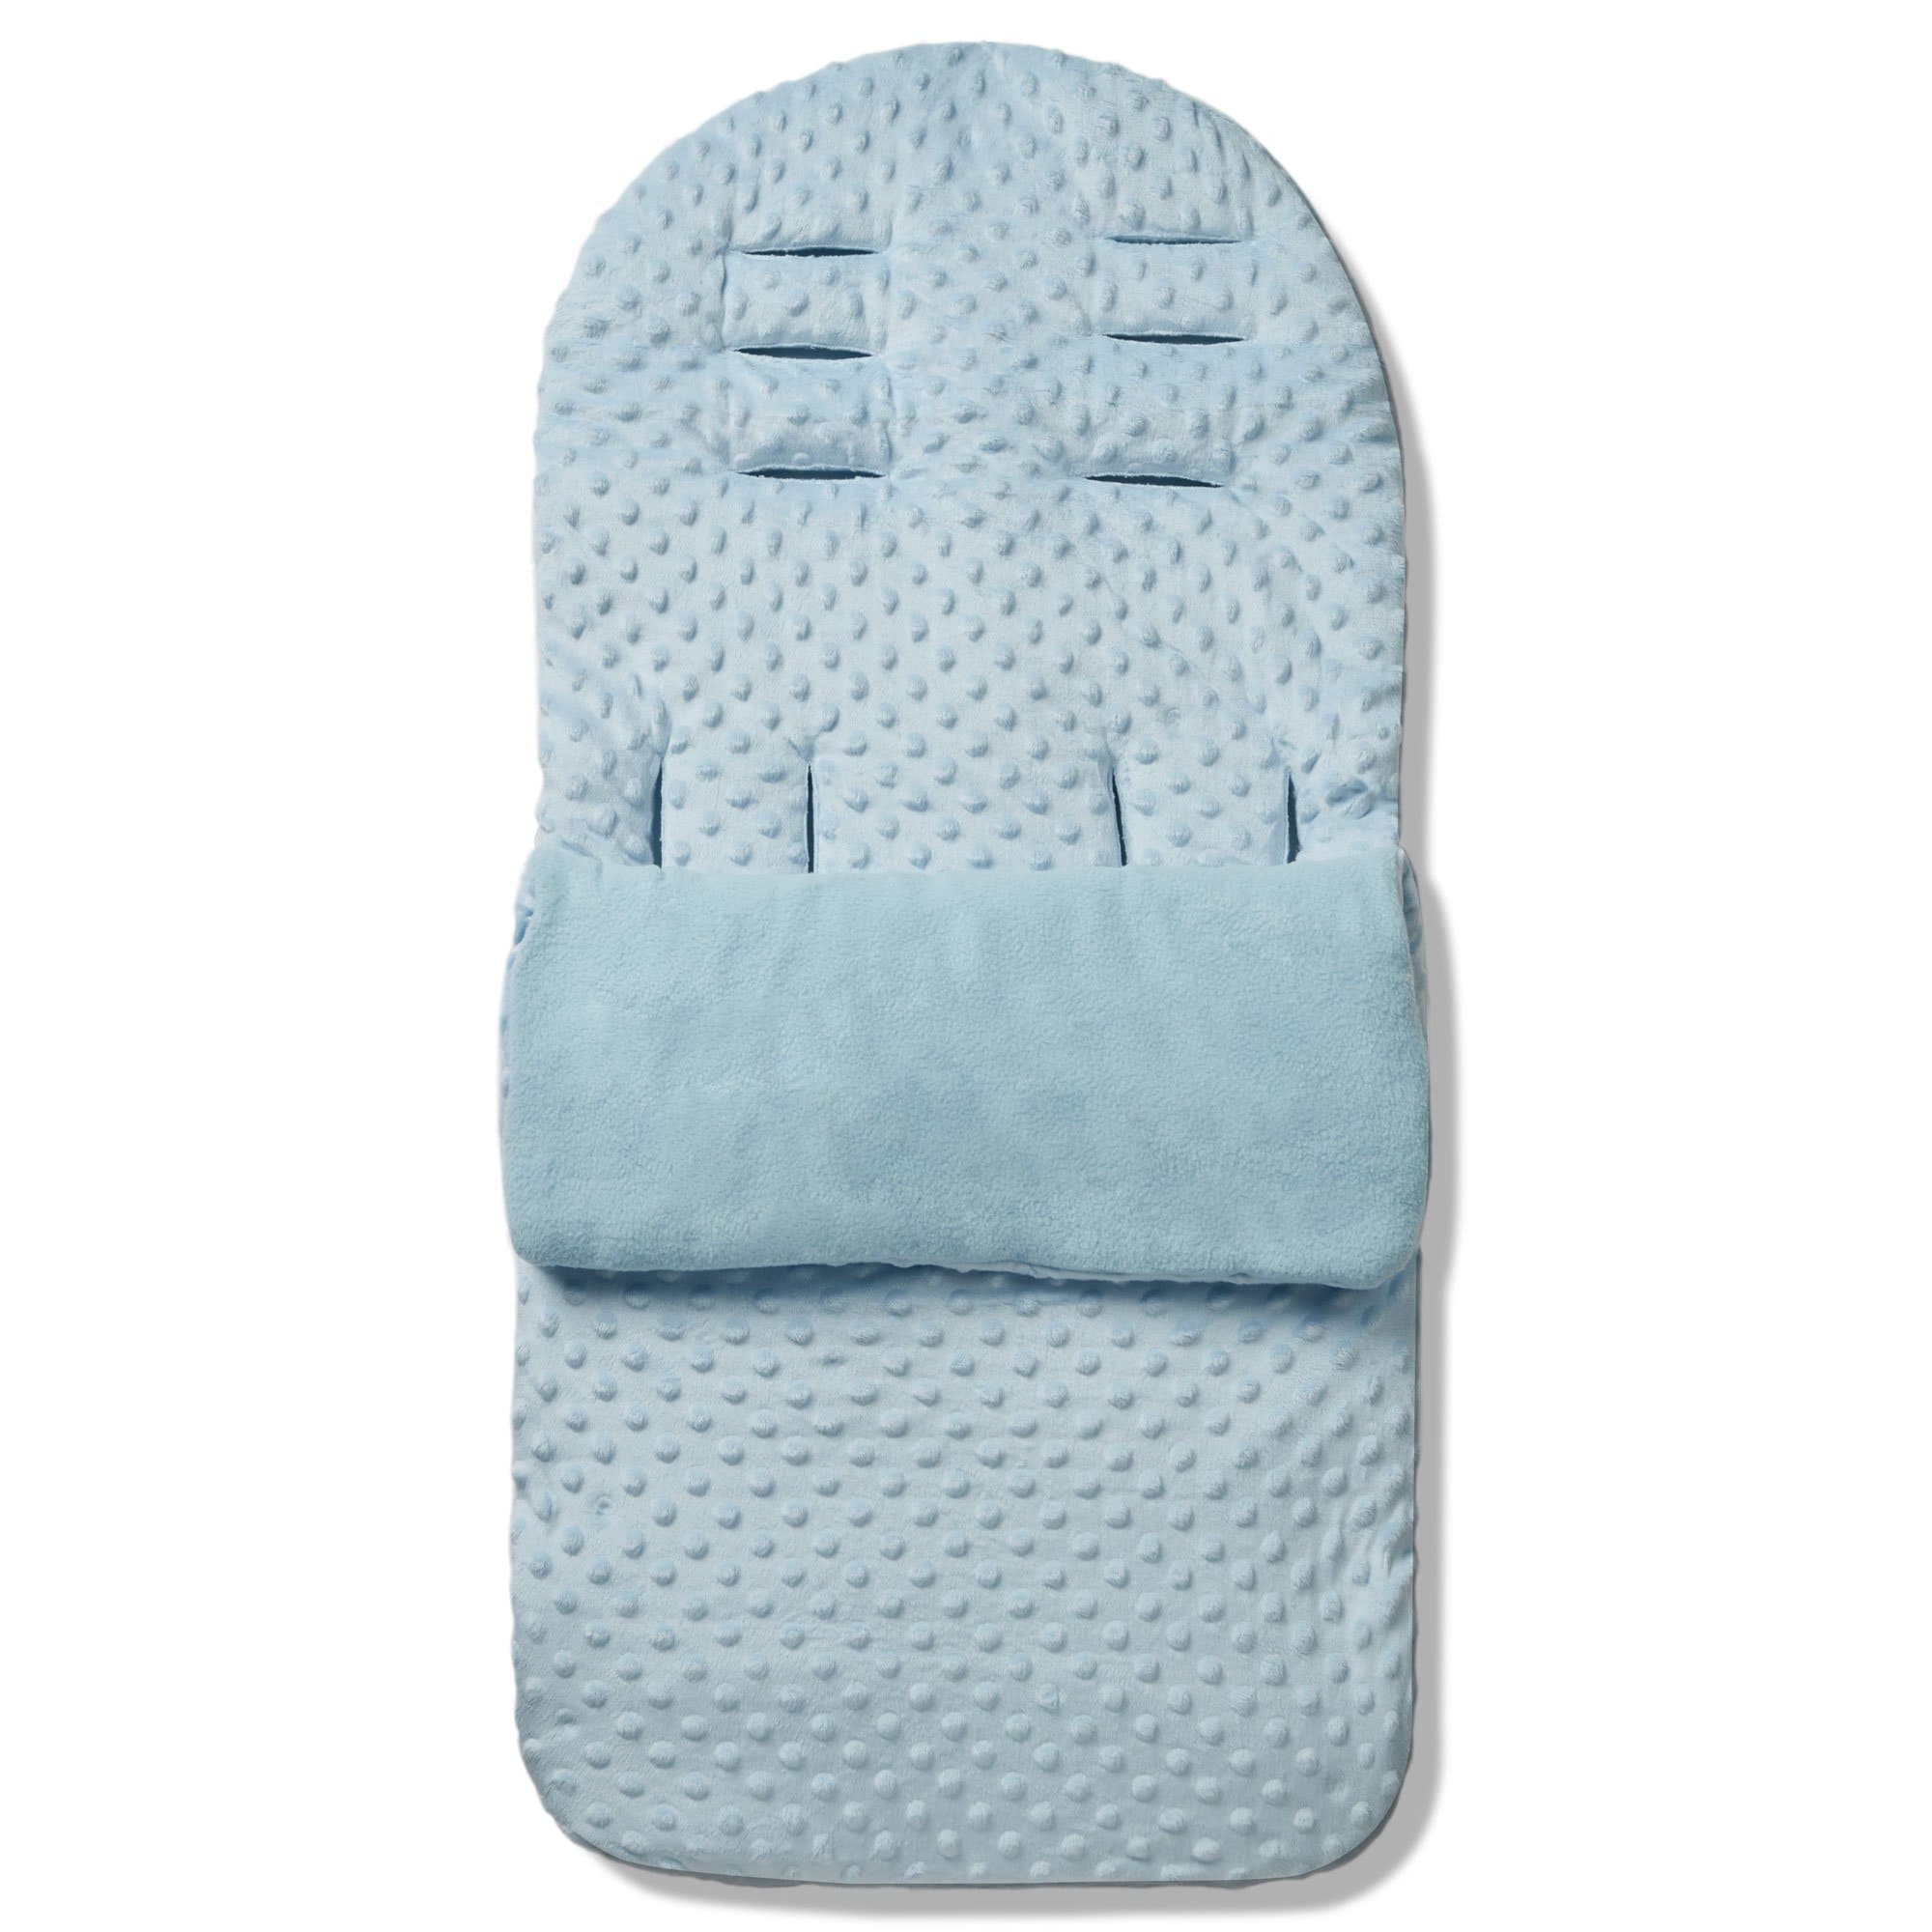 Dimple Footmuff / Cosy Toes Compatible with Safety 1st - Blue / Fits All Models | For Your Little One